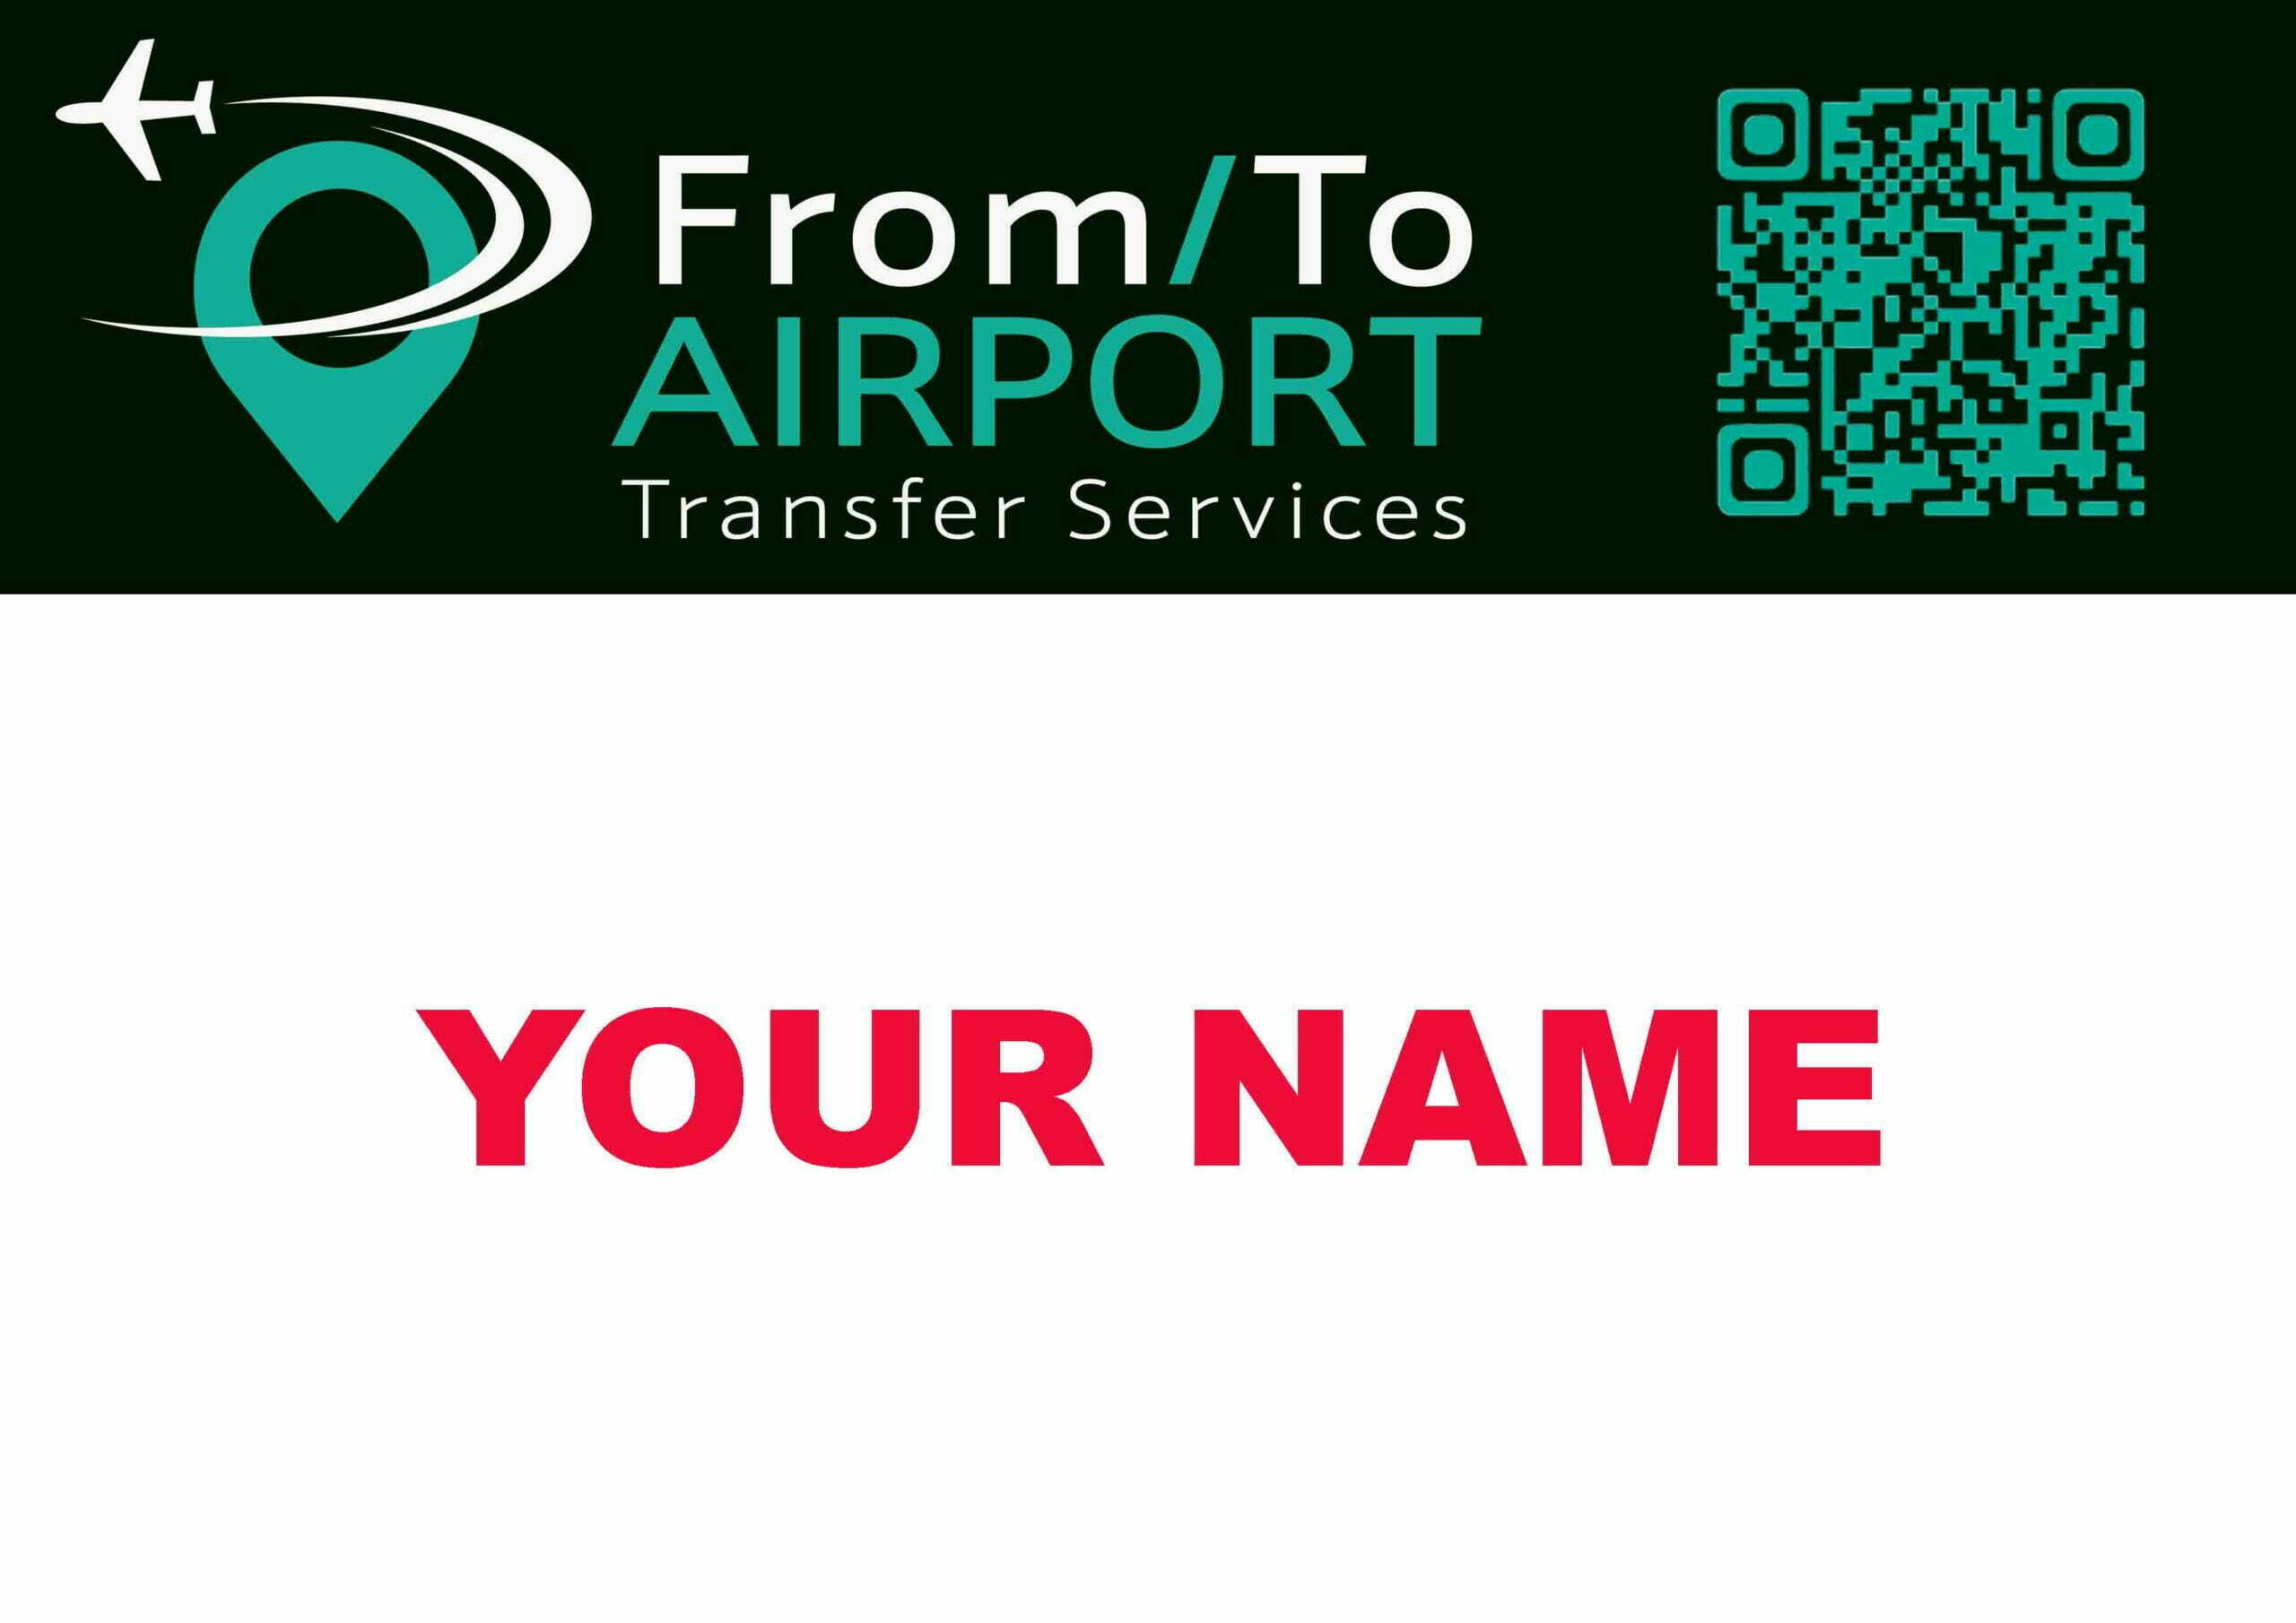 From To Airport Transfers